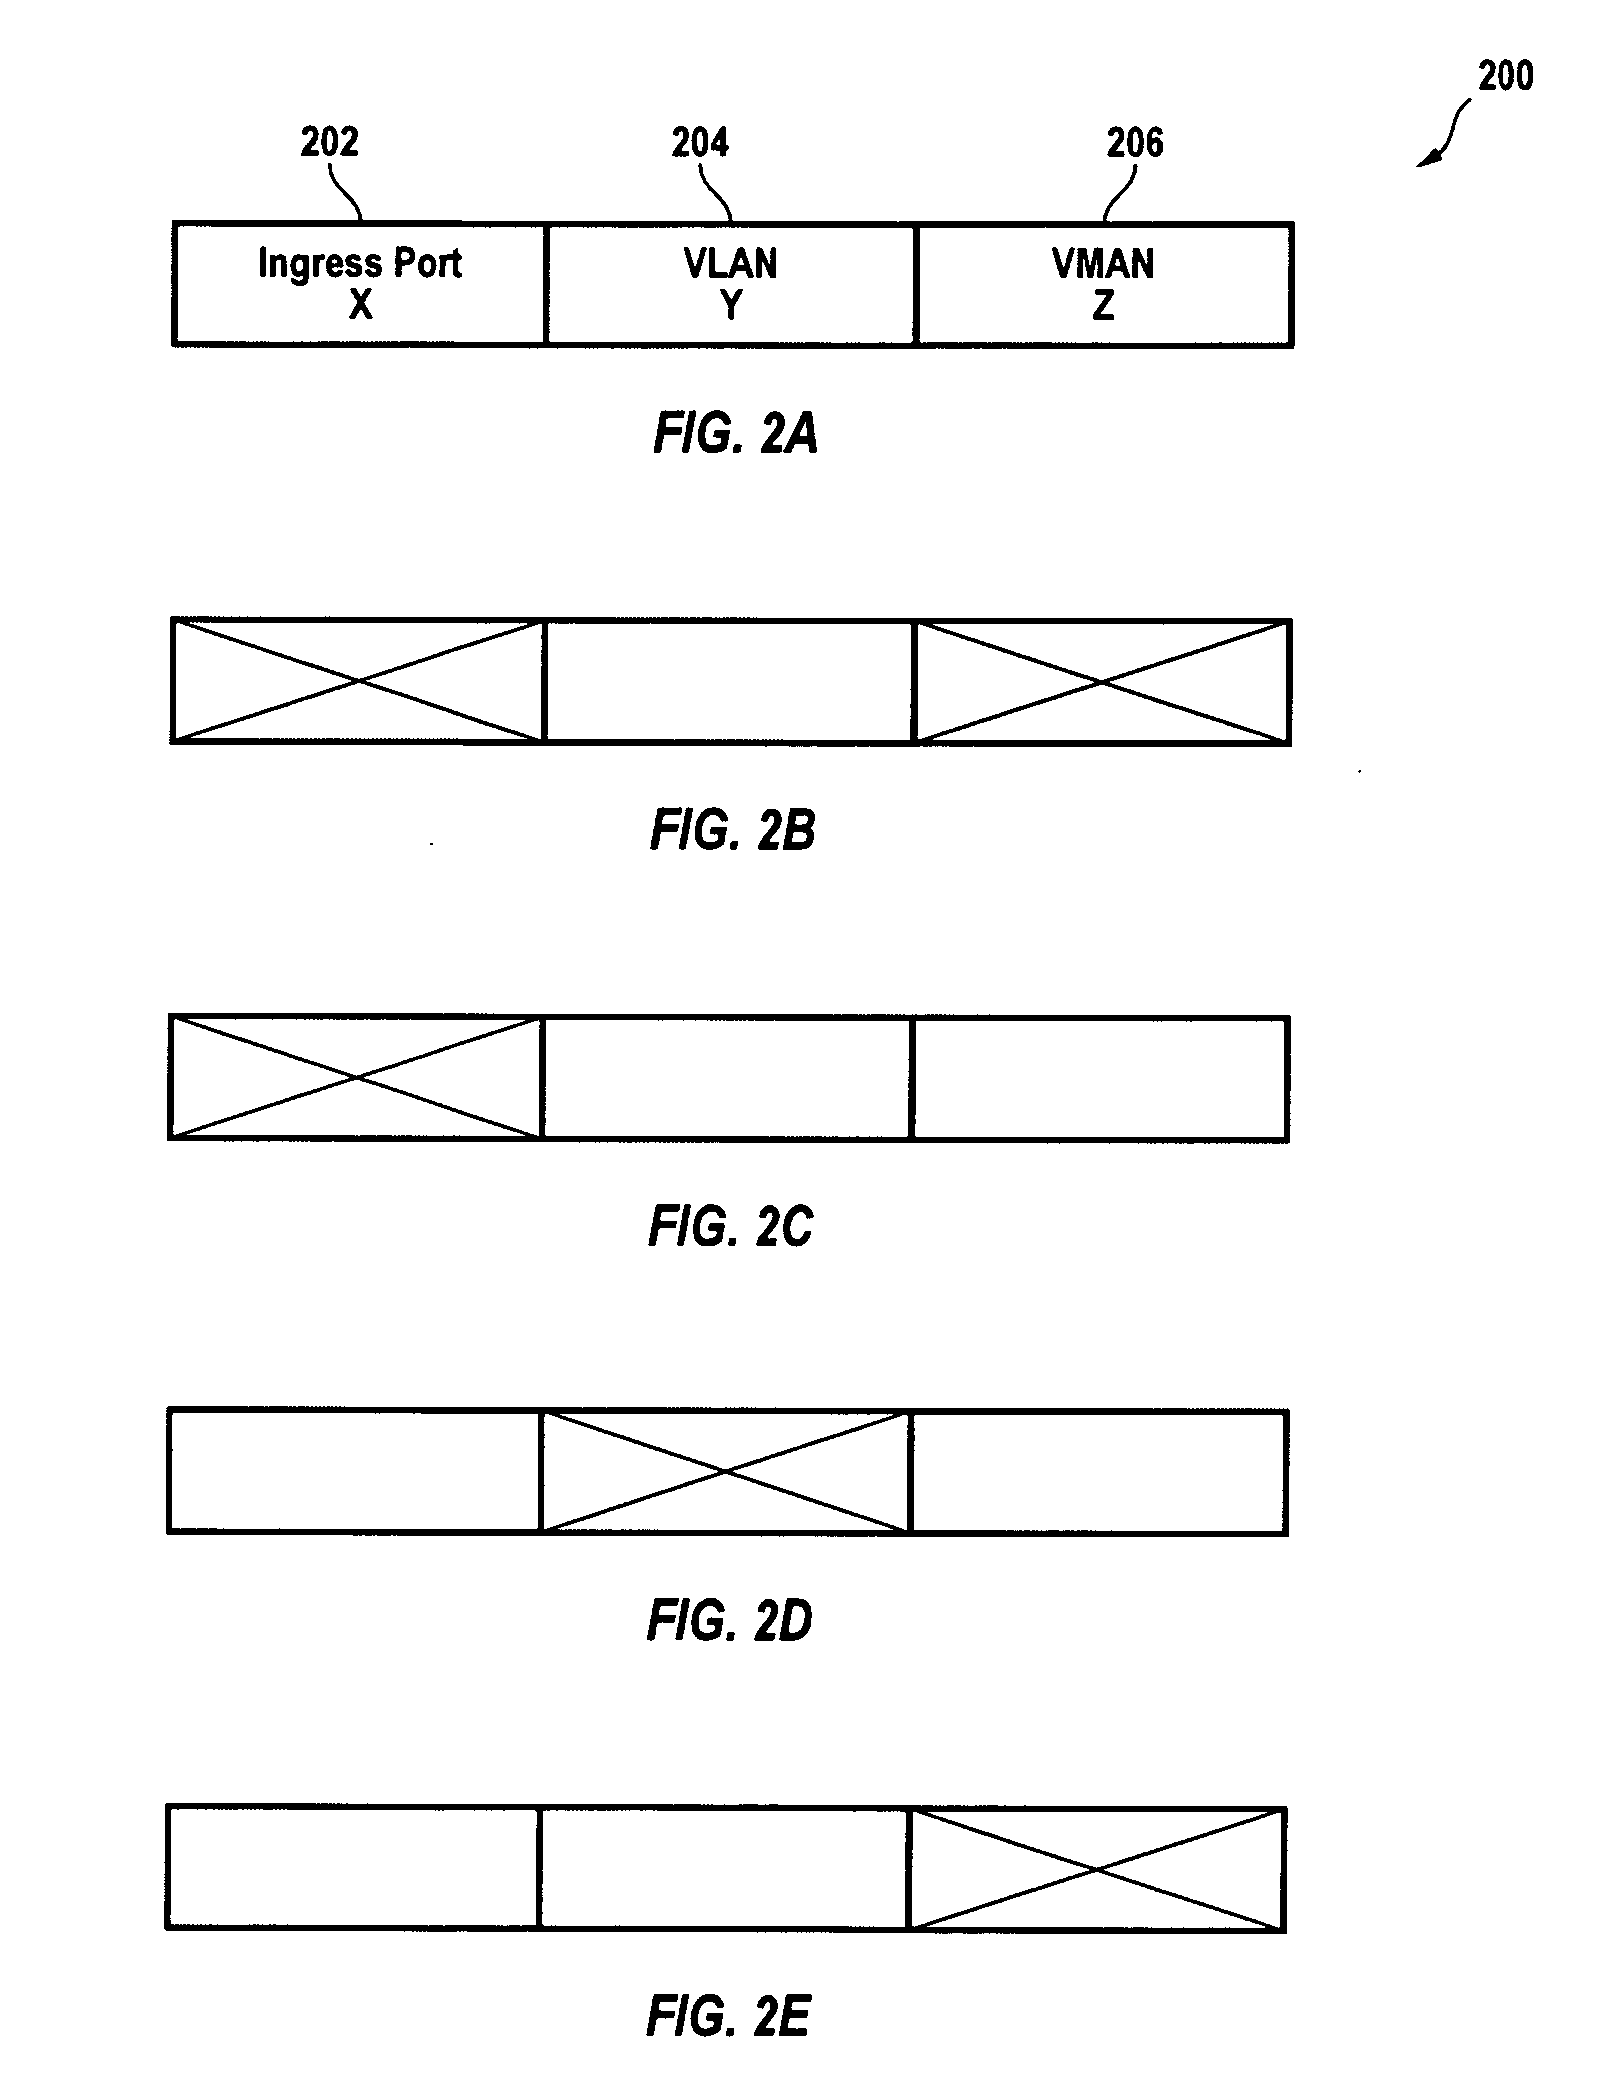 Method of providing virtual router functionality